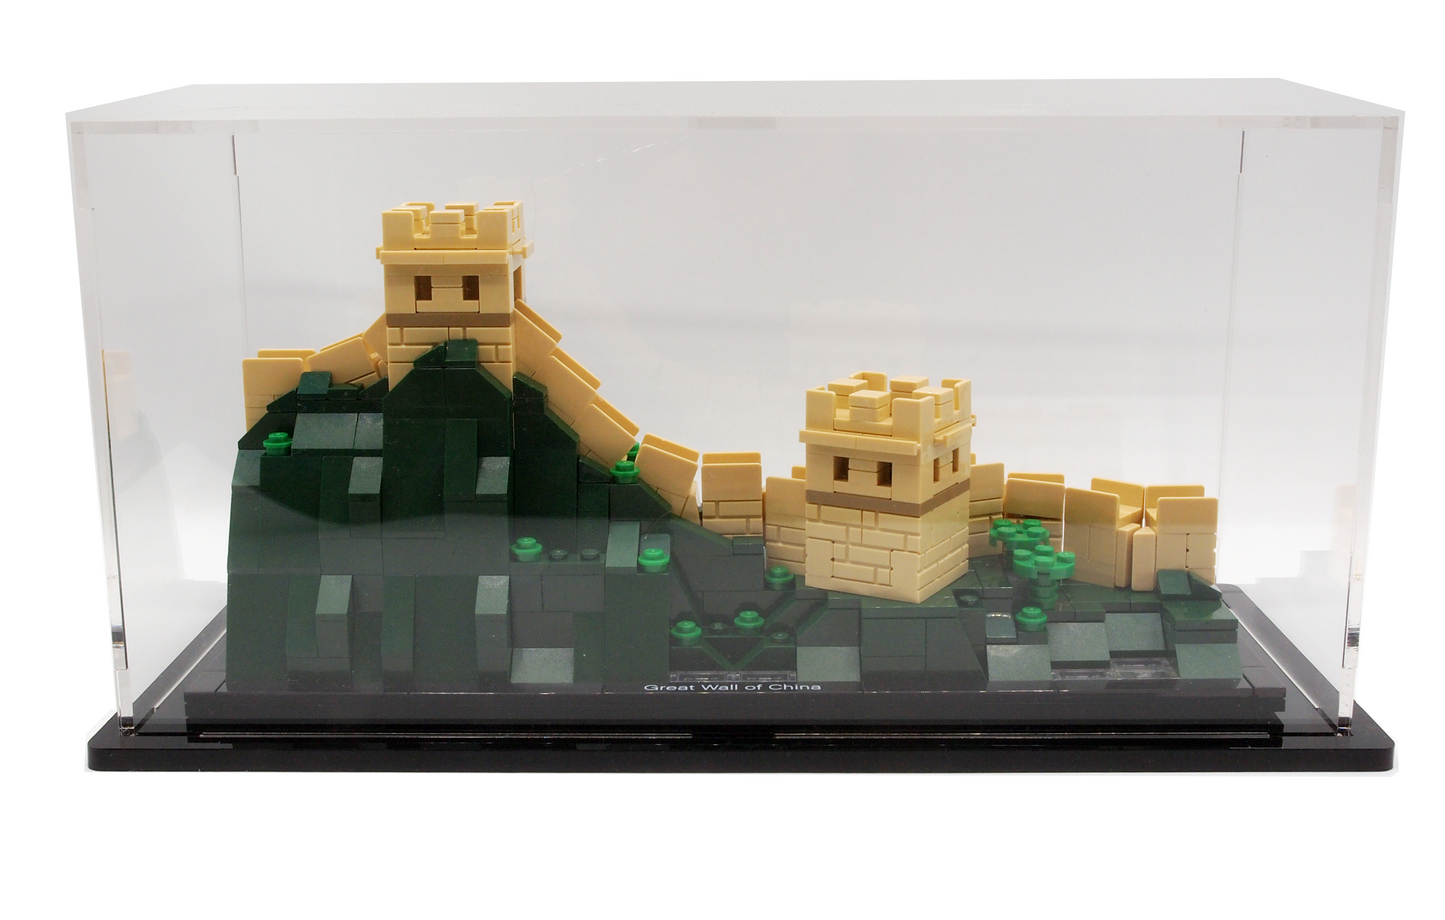 Display Case for LEGO Great Wall of China (21041) Set